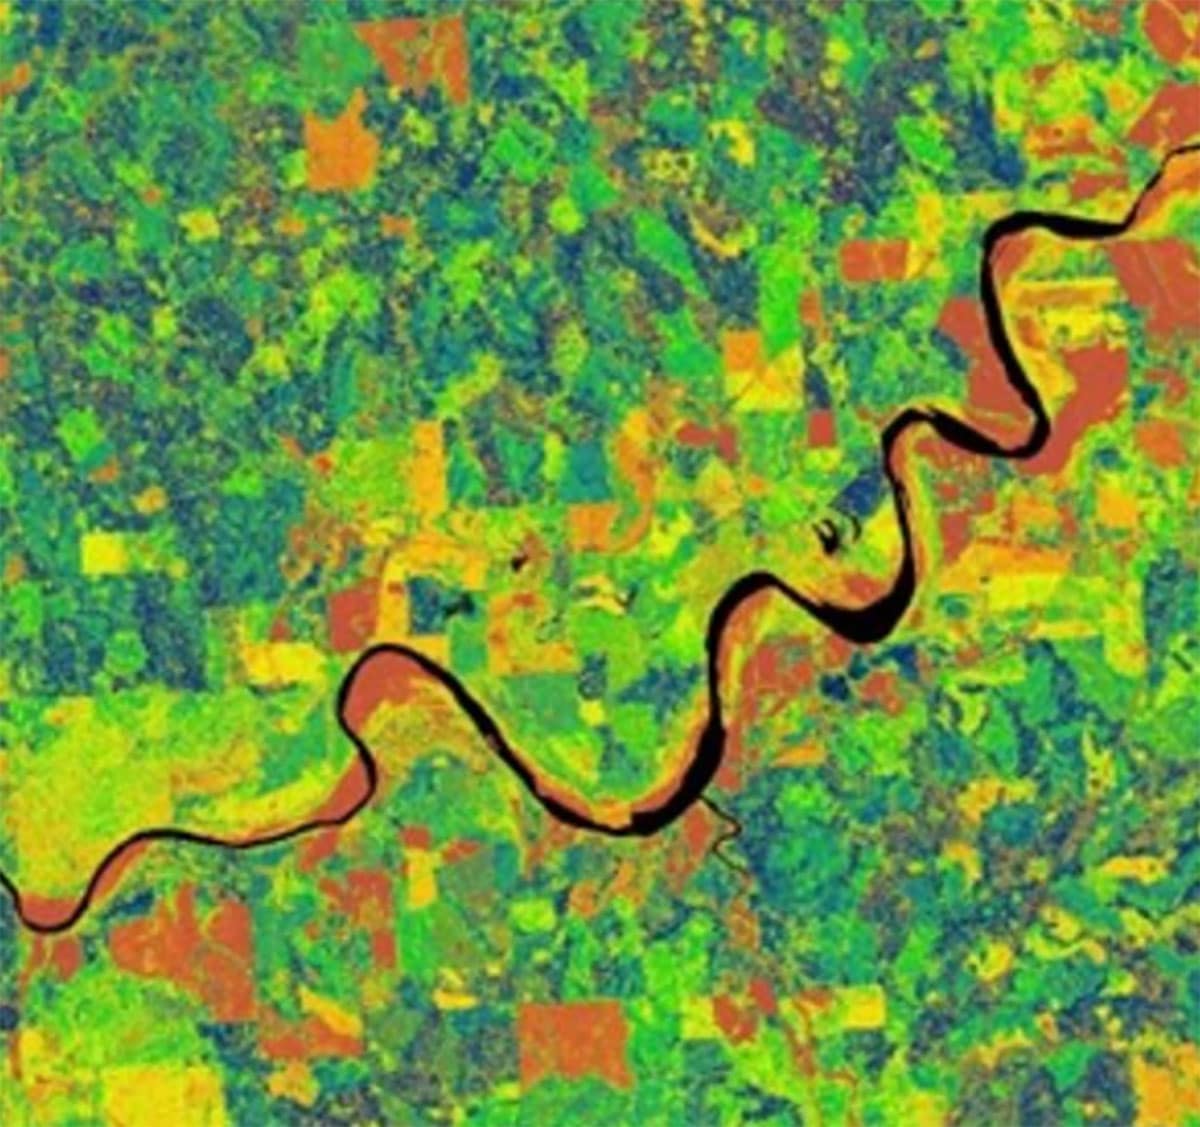 LiDAR remote sensing has emerged as a powerful tool for capturing detailed terrain features and three-dimensional vegetation structures. In this figure, we focus on the Mississippi Delta region in the United States, where a 1-meter resolution vegetation canopy height model was derived from airborne LiDAR data.